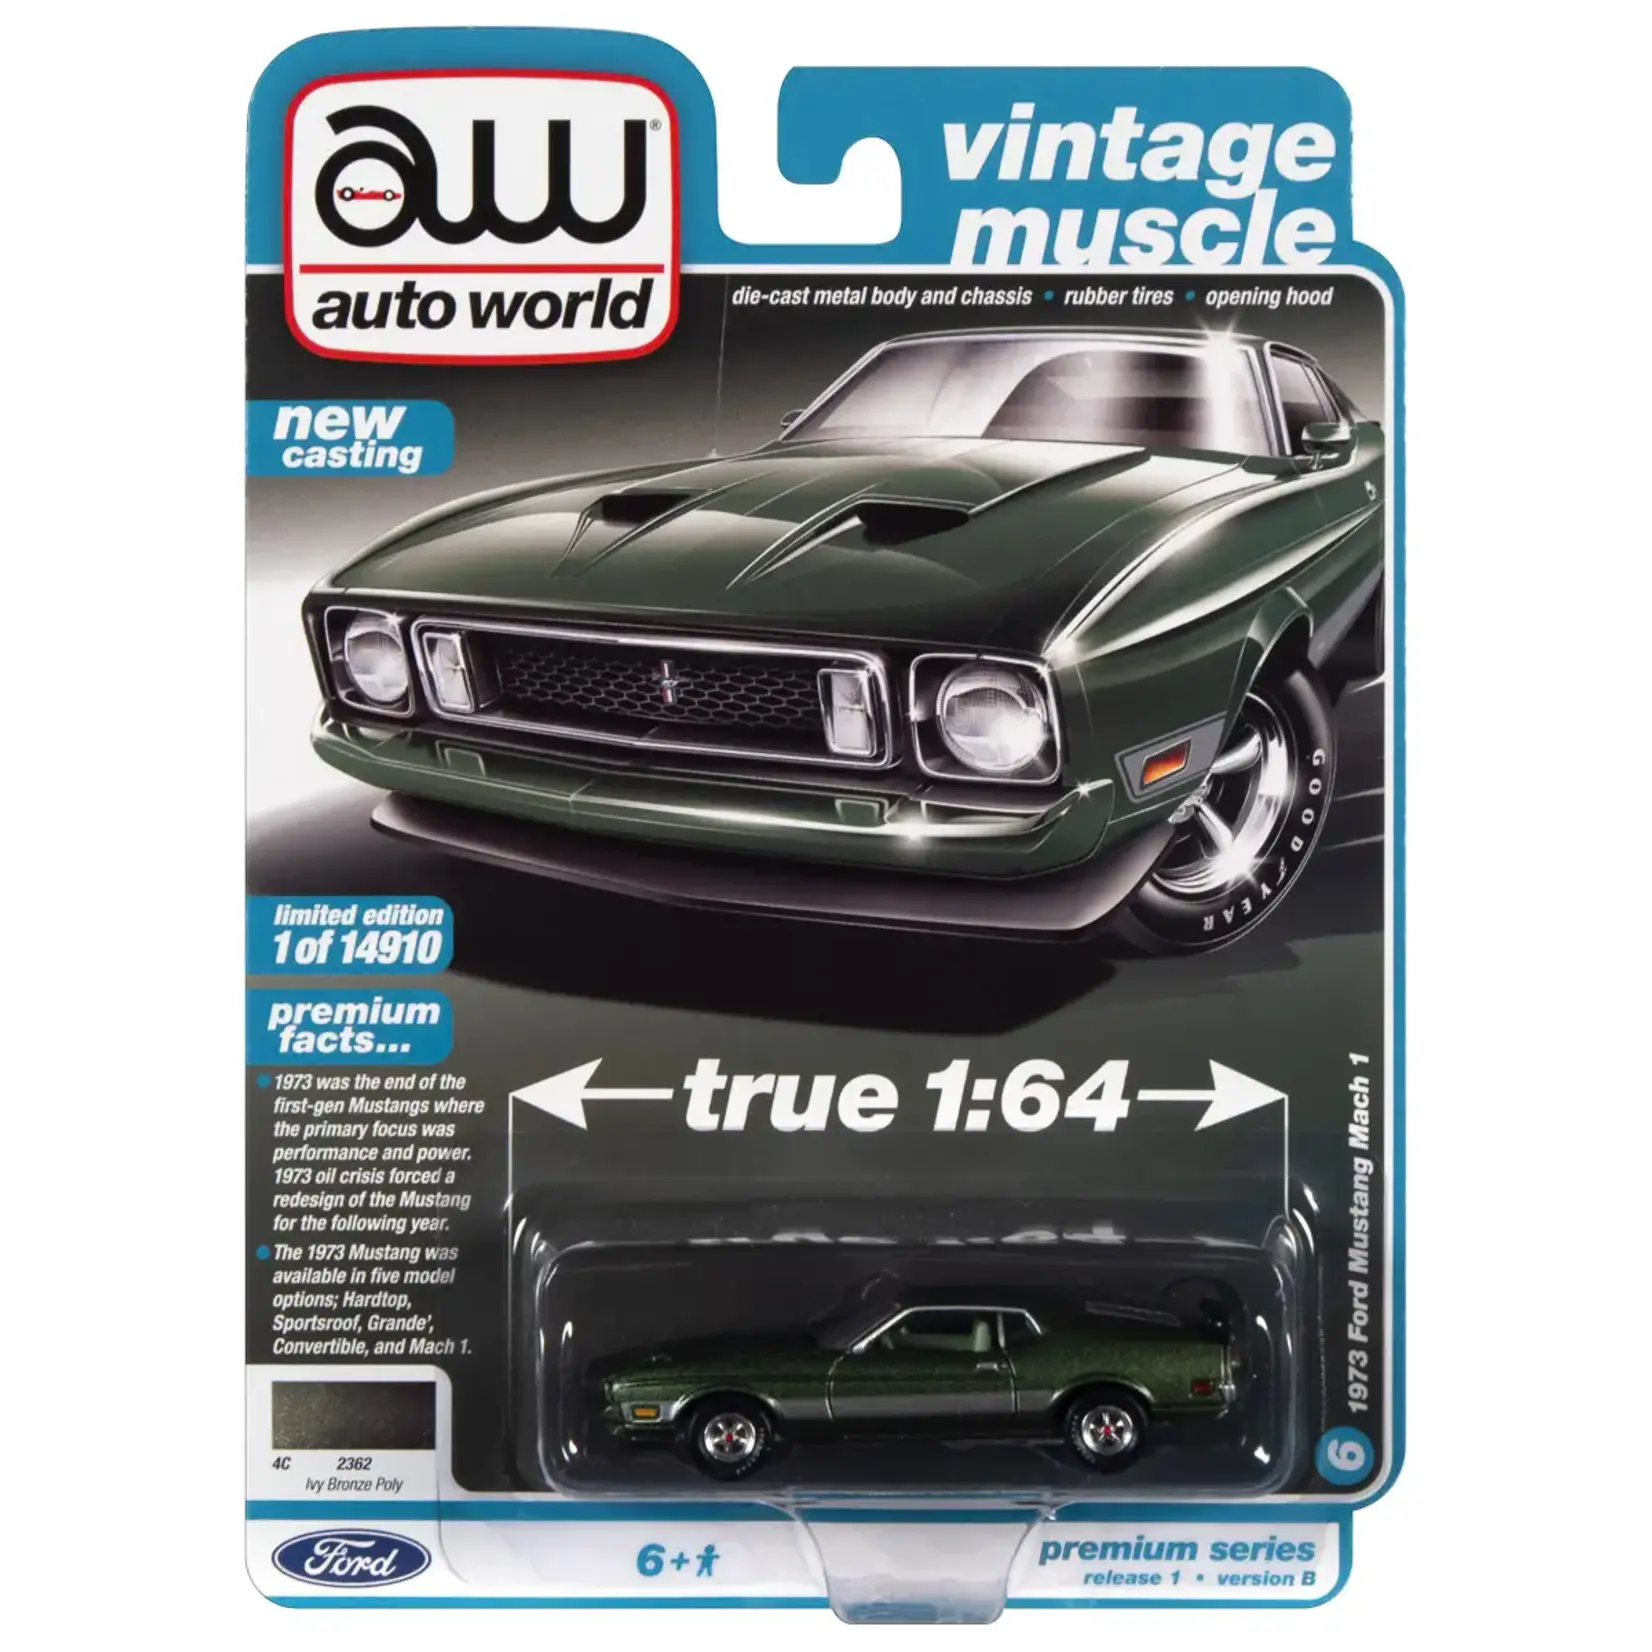 Auto World AW64352B-6 Auto World 1973 Ford Mustang Mach 1 Ivy Gloss Poly w/Silver Side Stripes